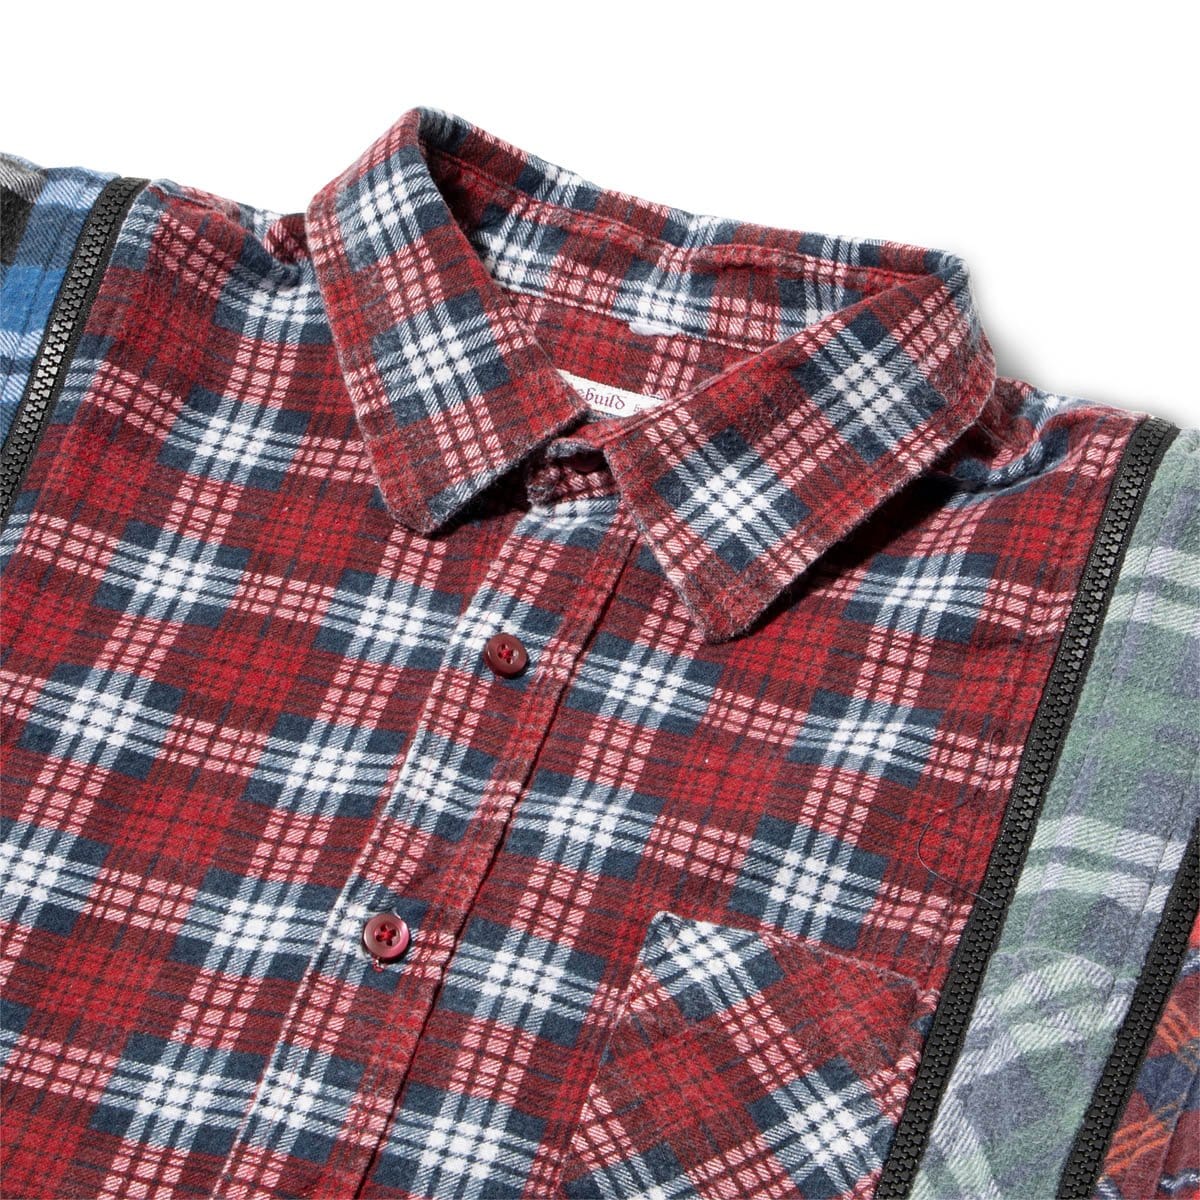 Needles Shirts ASSORTED / O/S 7 CUTS ZIPPED WIDE FLANNEL SHIRT SS21 6